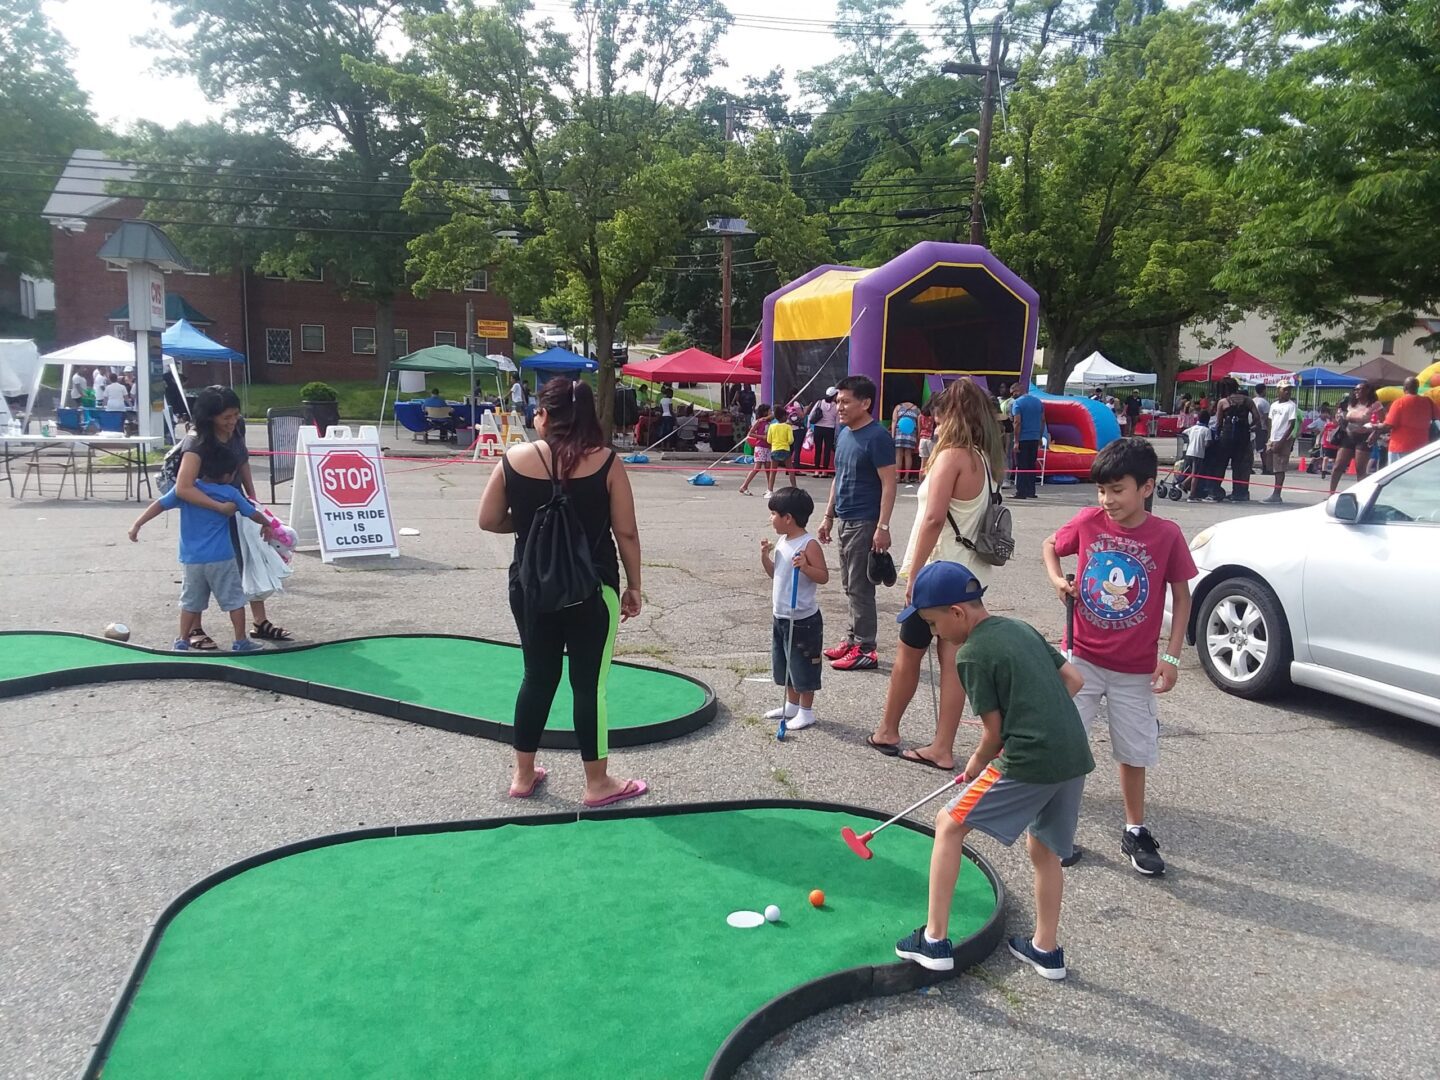 A group of people playing mini golf at an outdoor event.